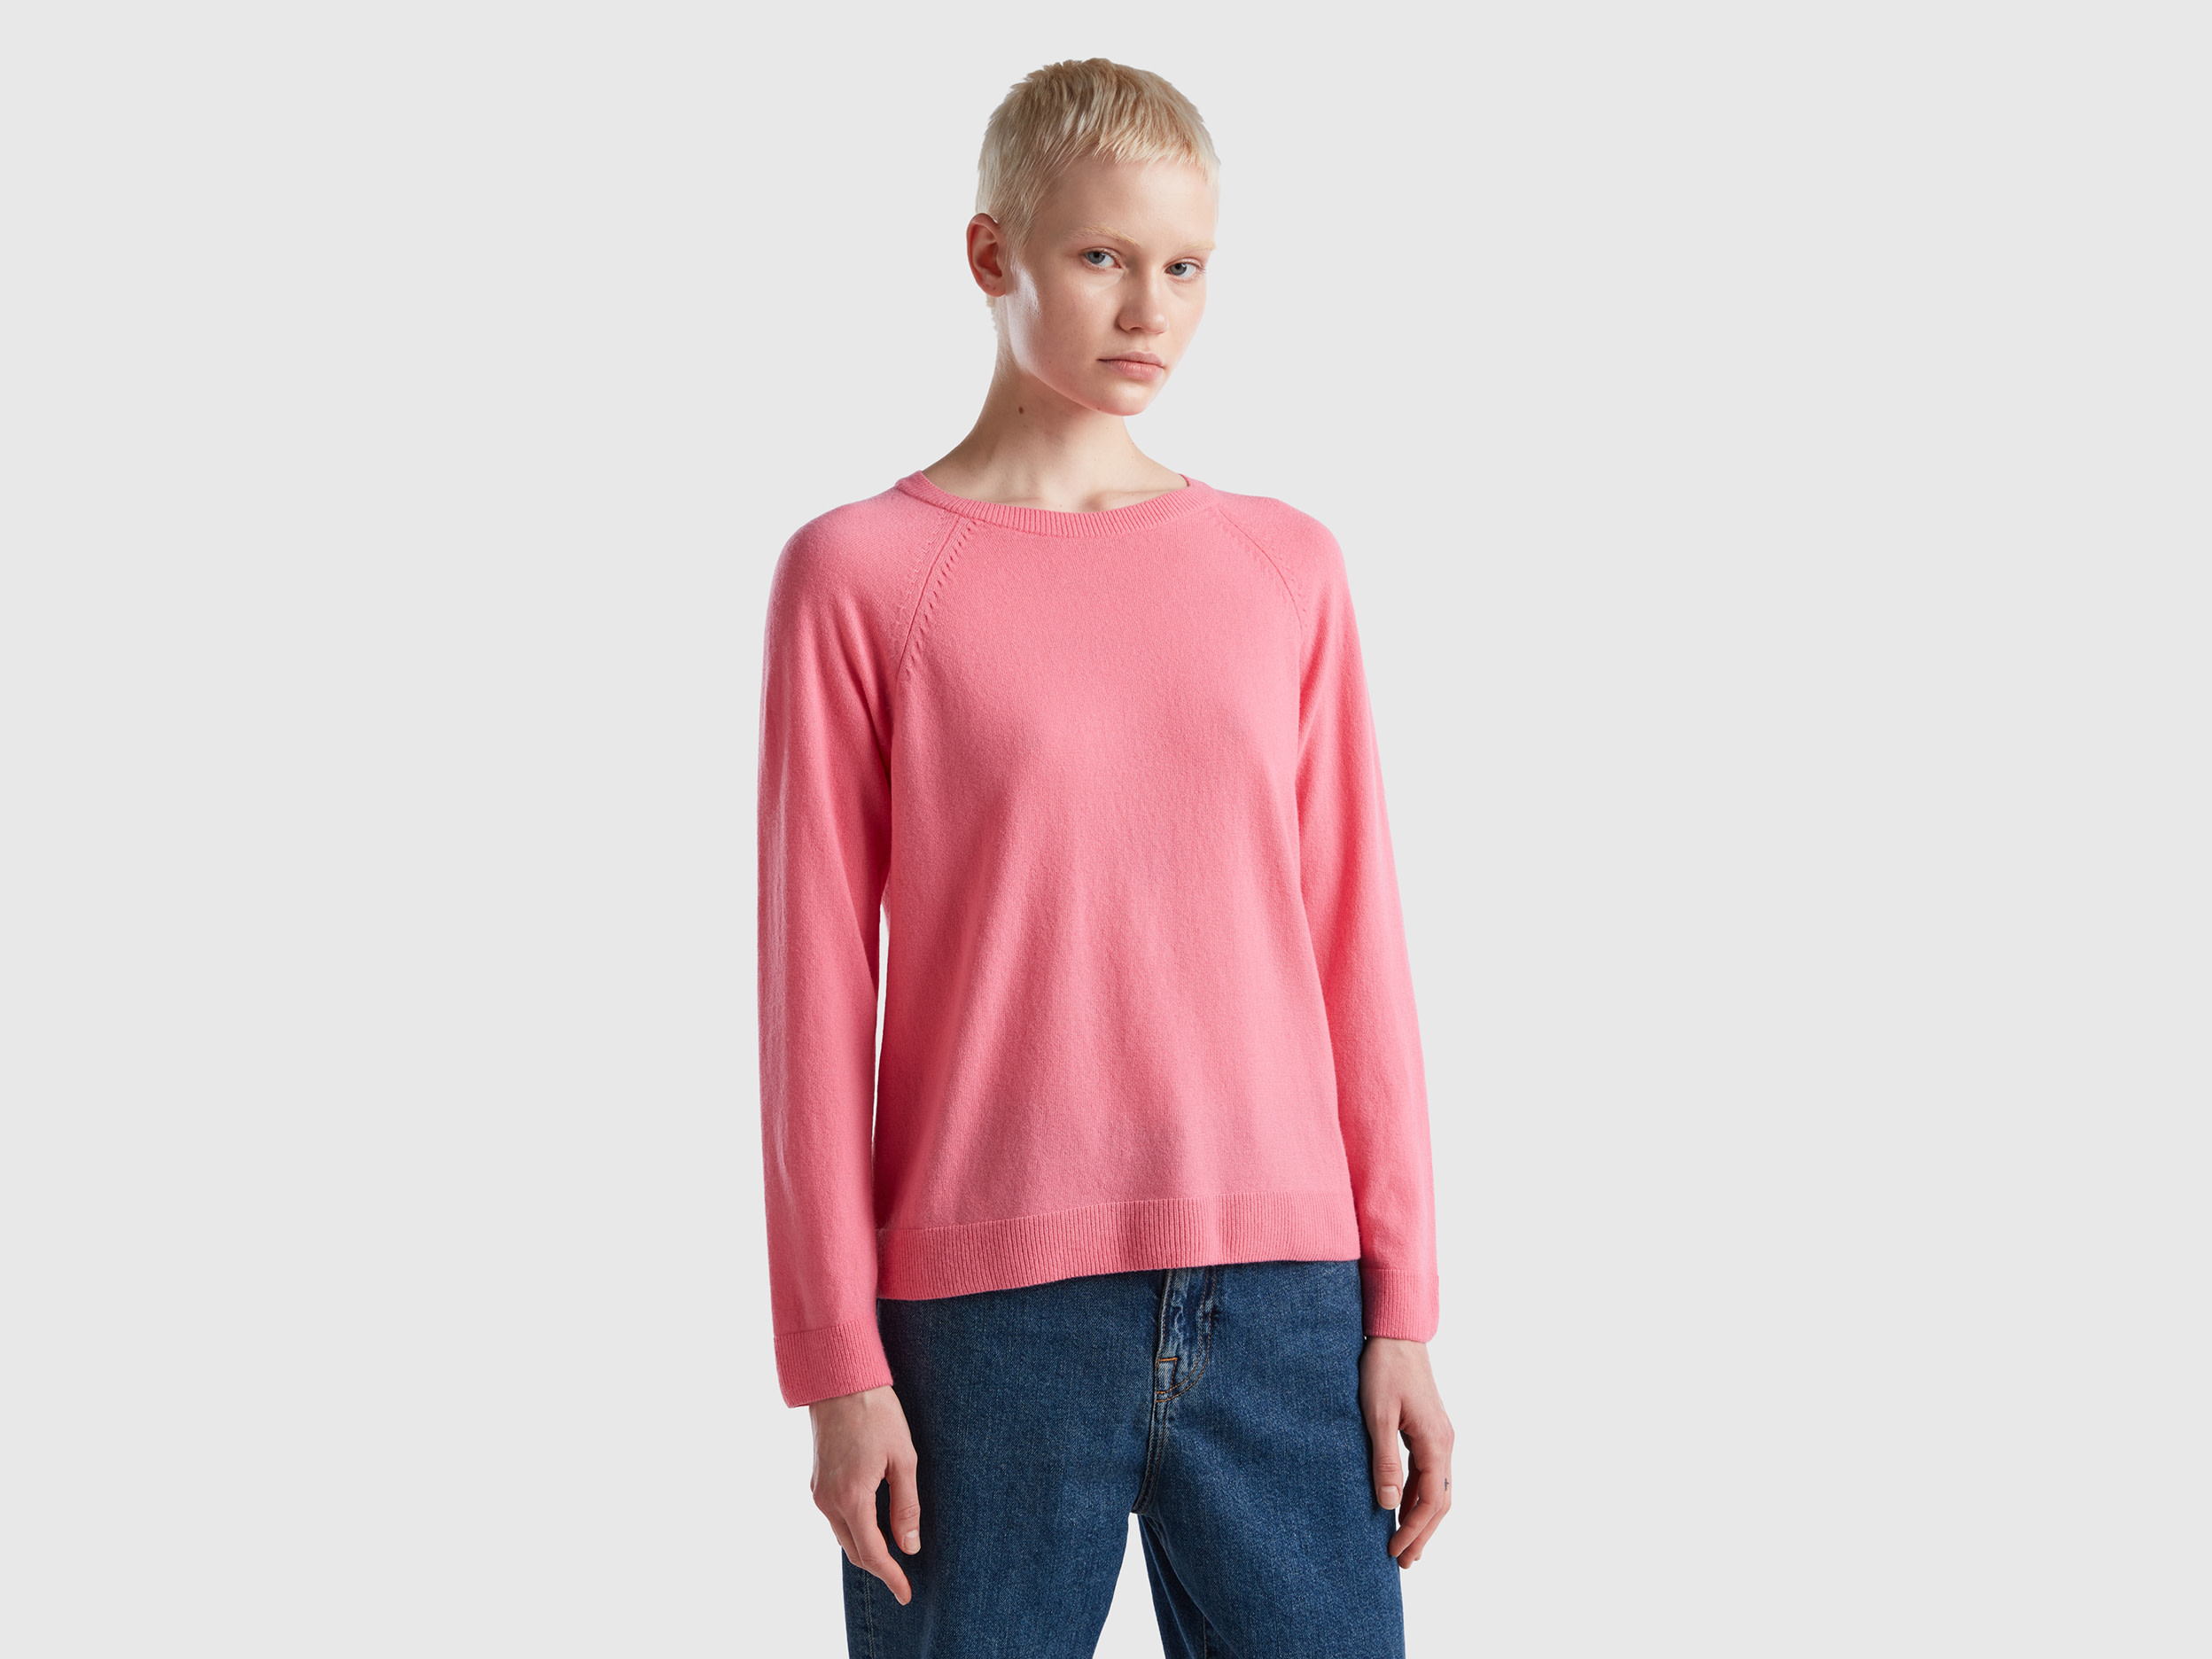 Benetton, Pink Crew Neck Sweater In Cashmere And Wool Blend, size XL, Pink, Women